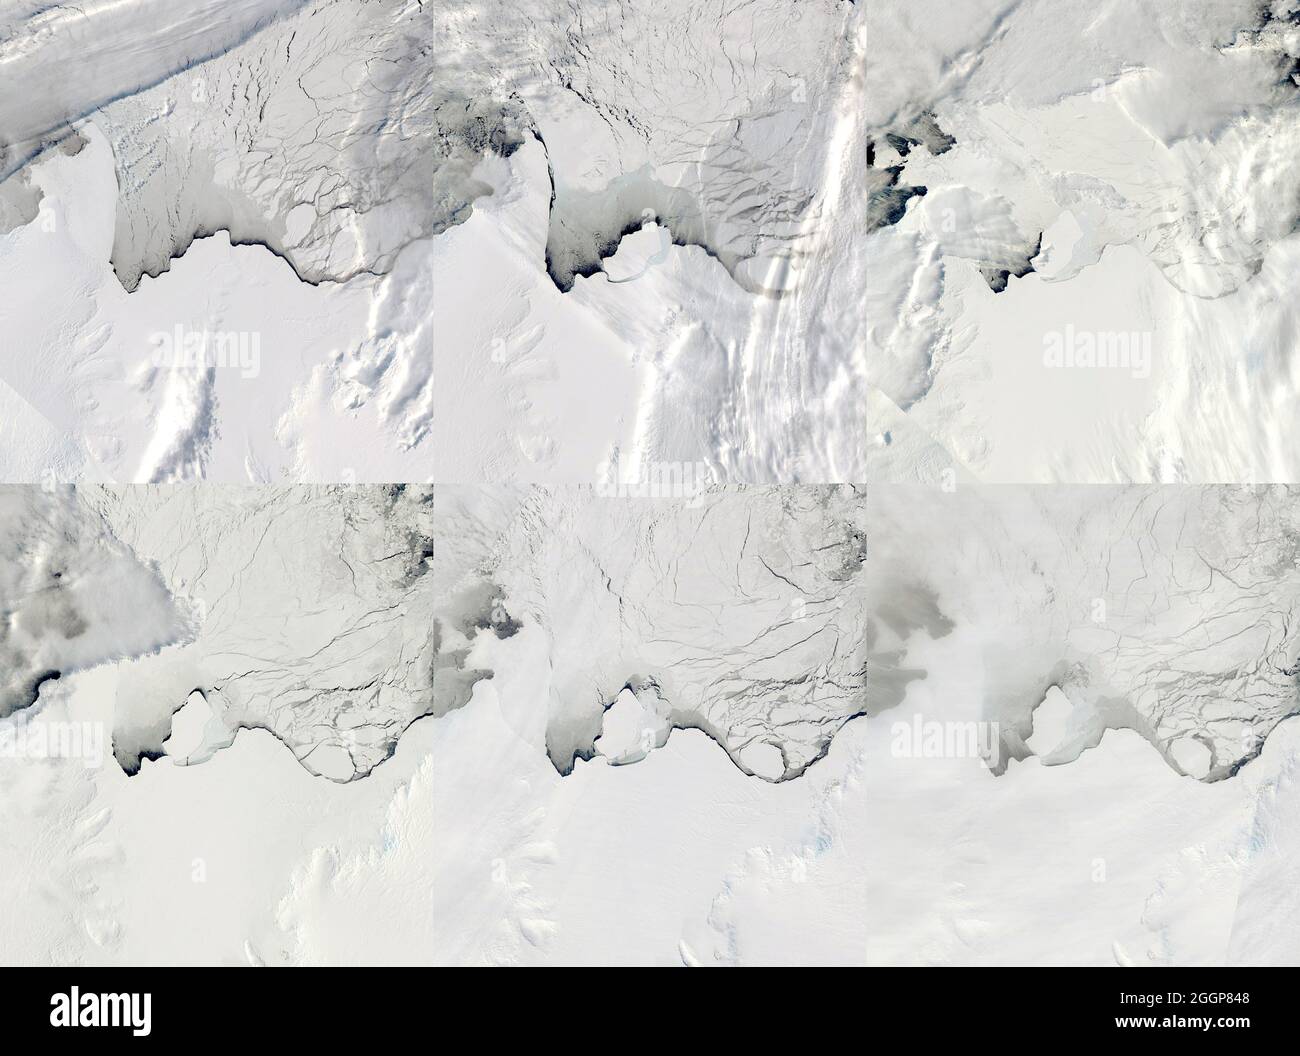 Composite of six satellite images taken between September 13 and October 2, 2019 show glacial rifting and the calving of an iceberg from East Antarctica' Amery Ice Shelf. Stock Photo